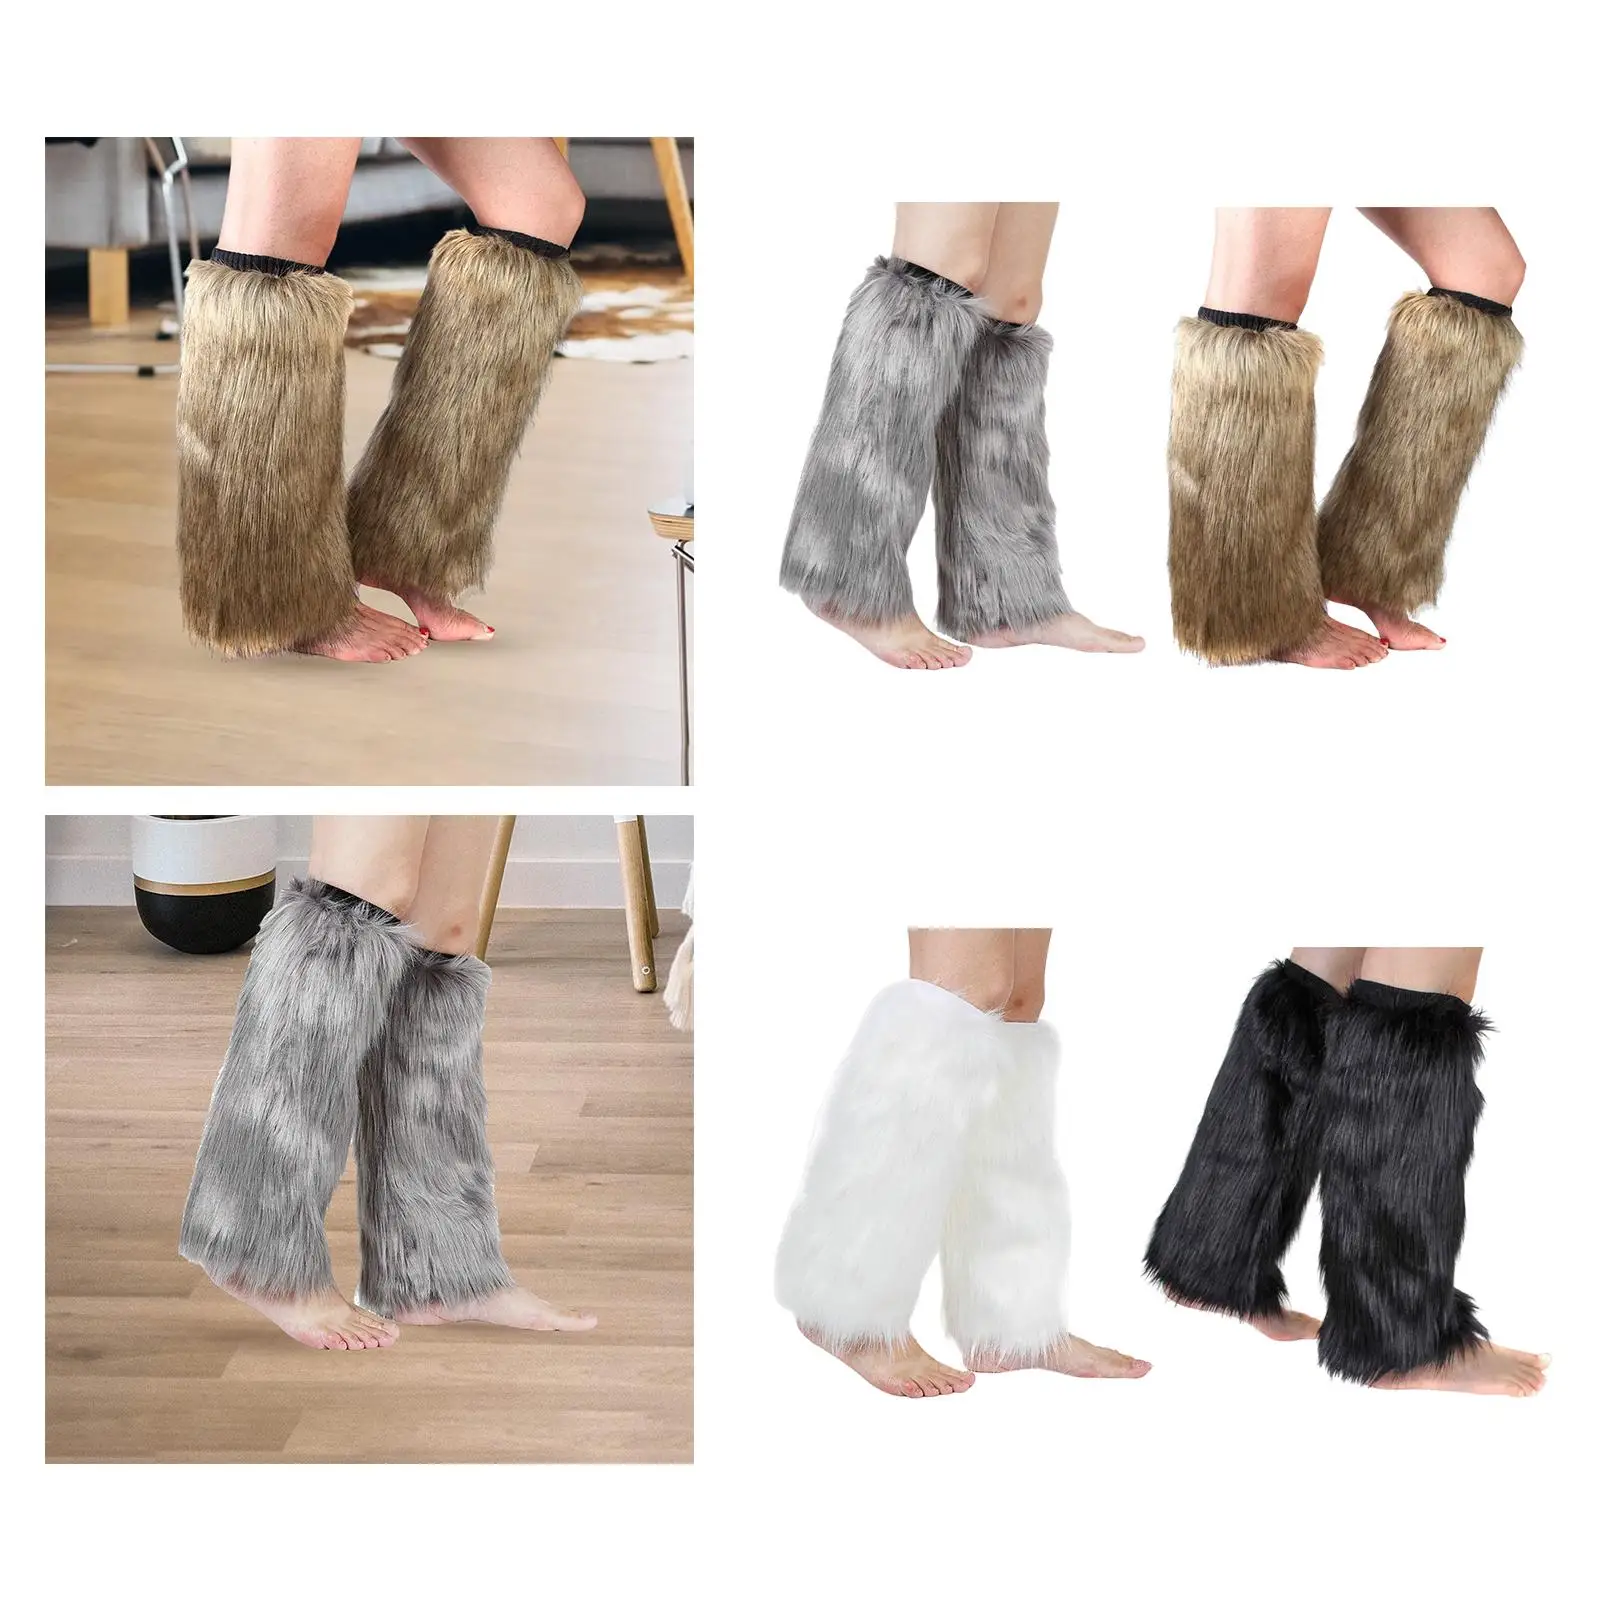 Leg Warmers Eskimo Party Costumes Stockings Boot Covers Boots Cuff Cover for Adult Long Boots Heels Cosplay Costume Party